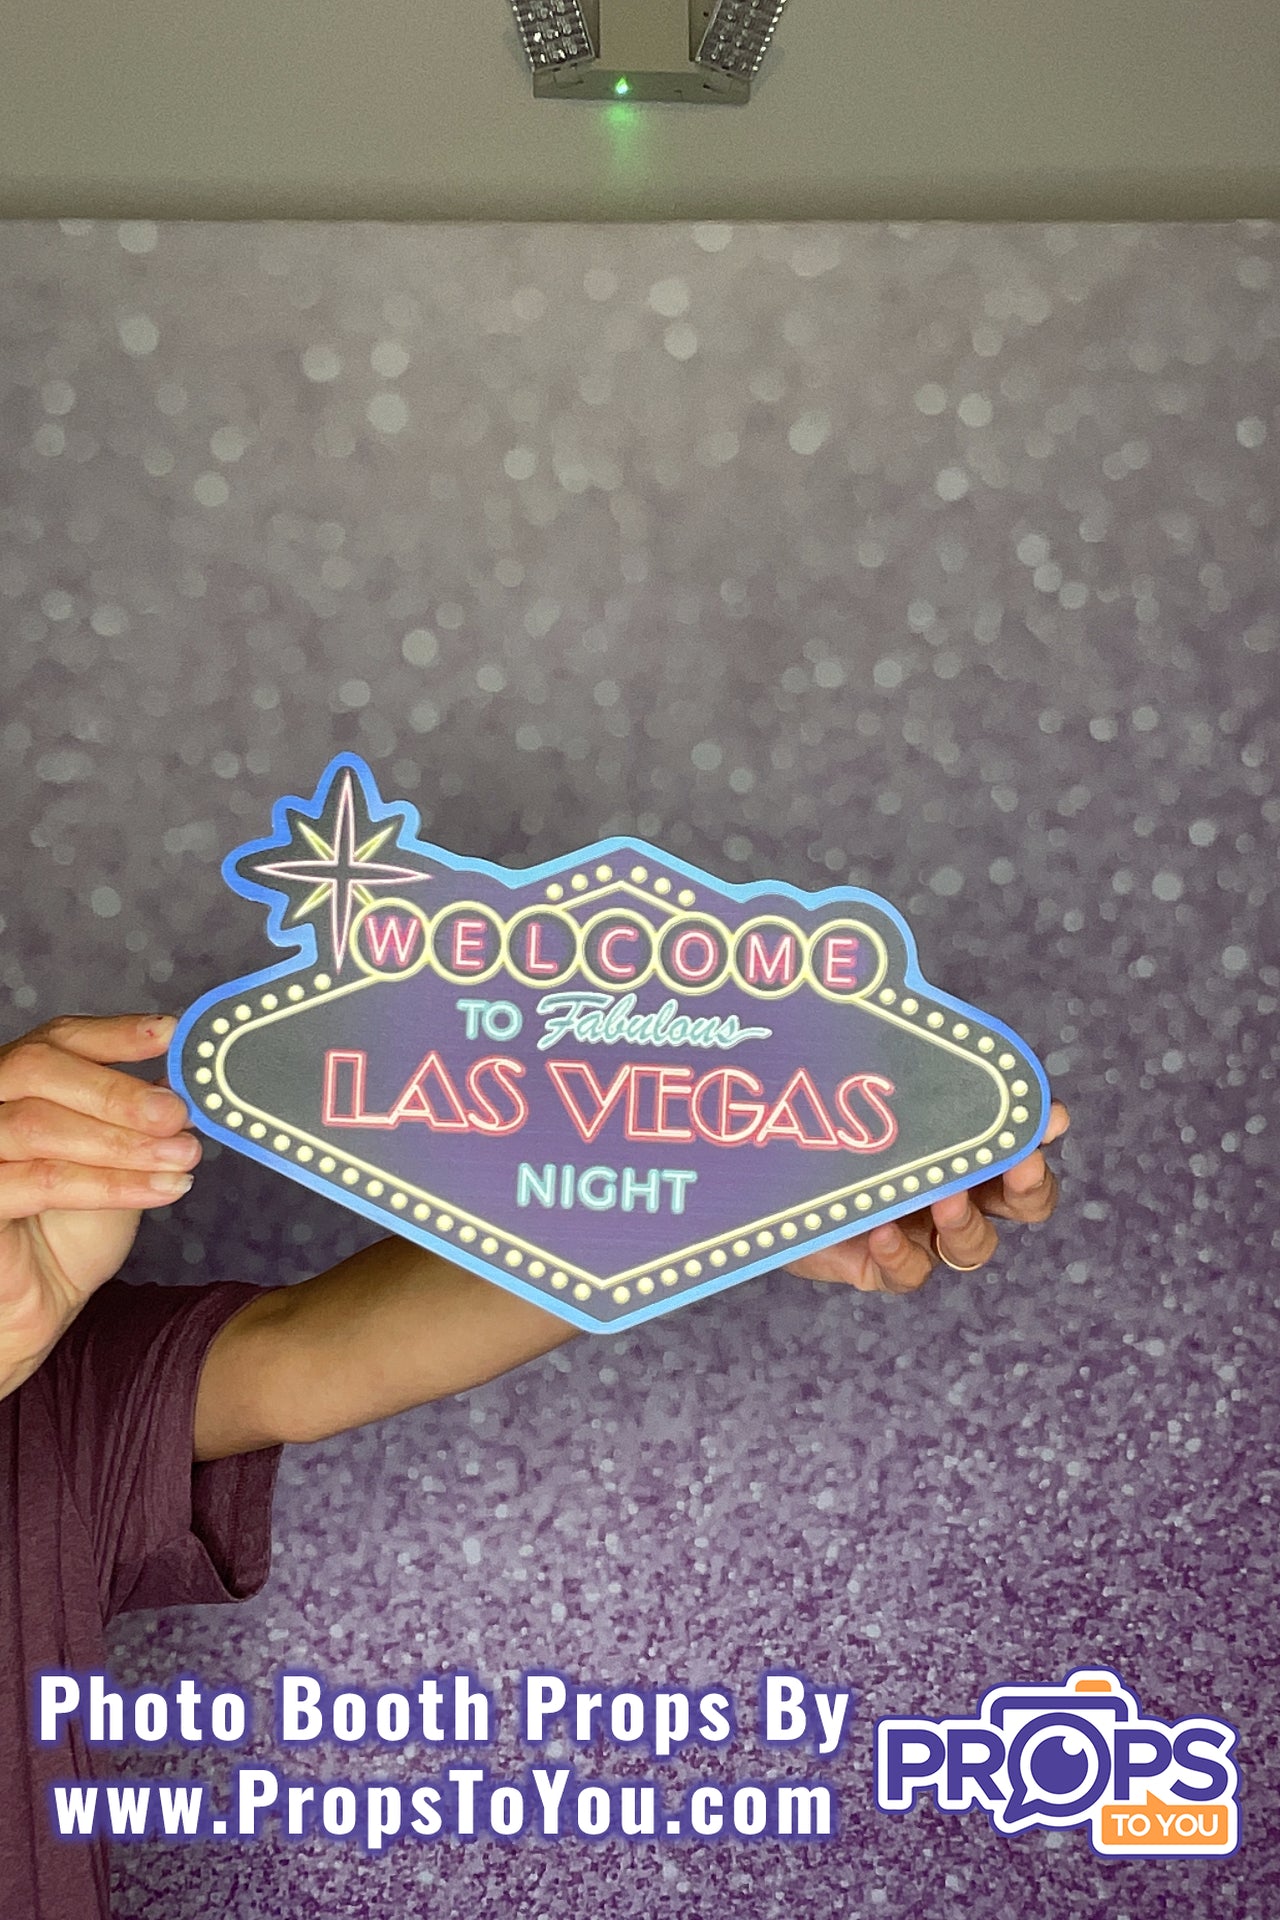 BUNDLE! Las Vegas Casino Night - 5 Double-Sided Photo Booth Props